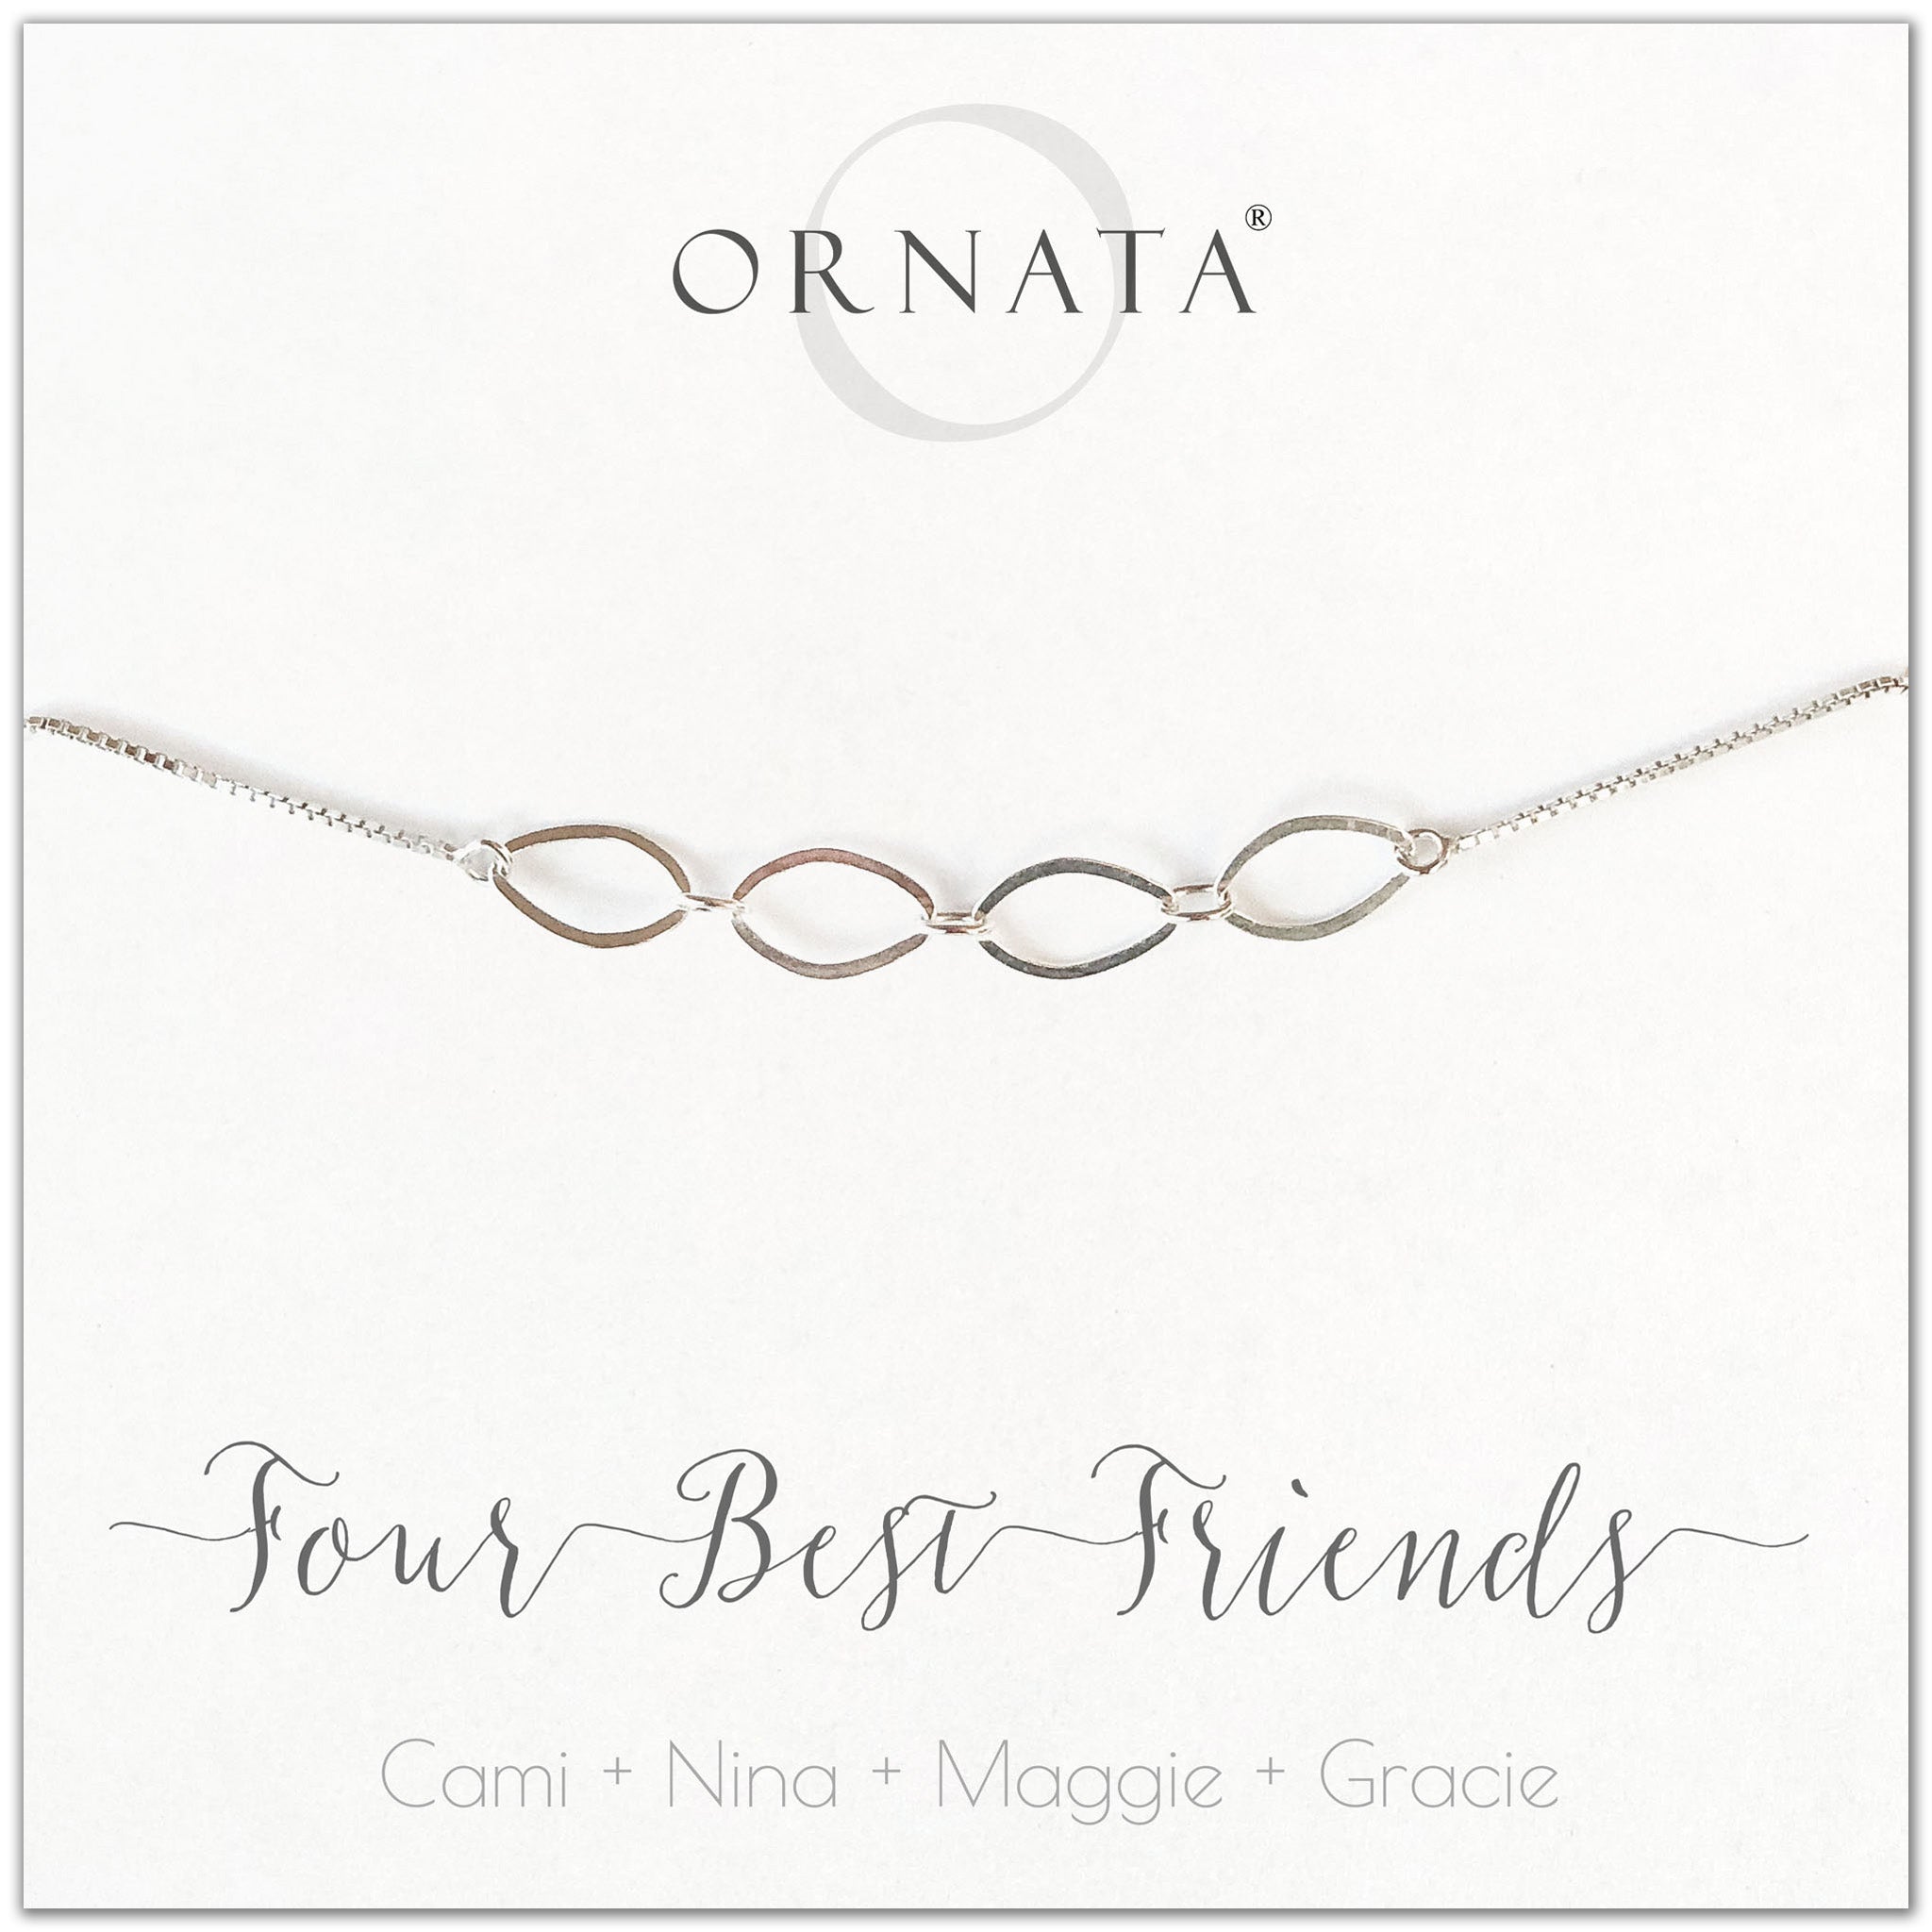 Four best friends personalized sterling silver bolo bracelet. Our custom bracelets make good gifts for best friends or sisters. 